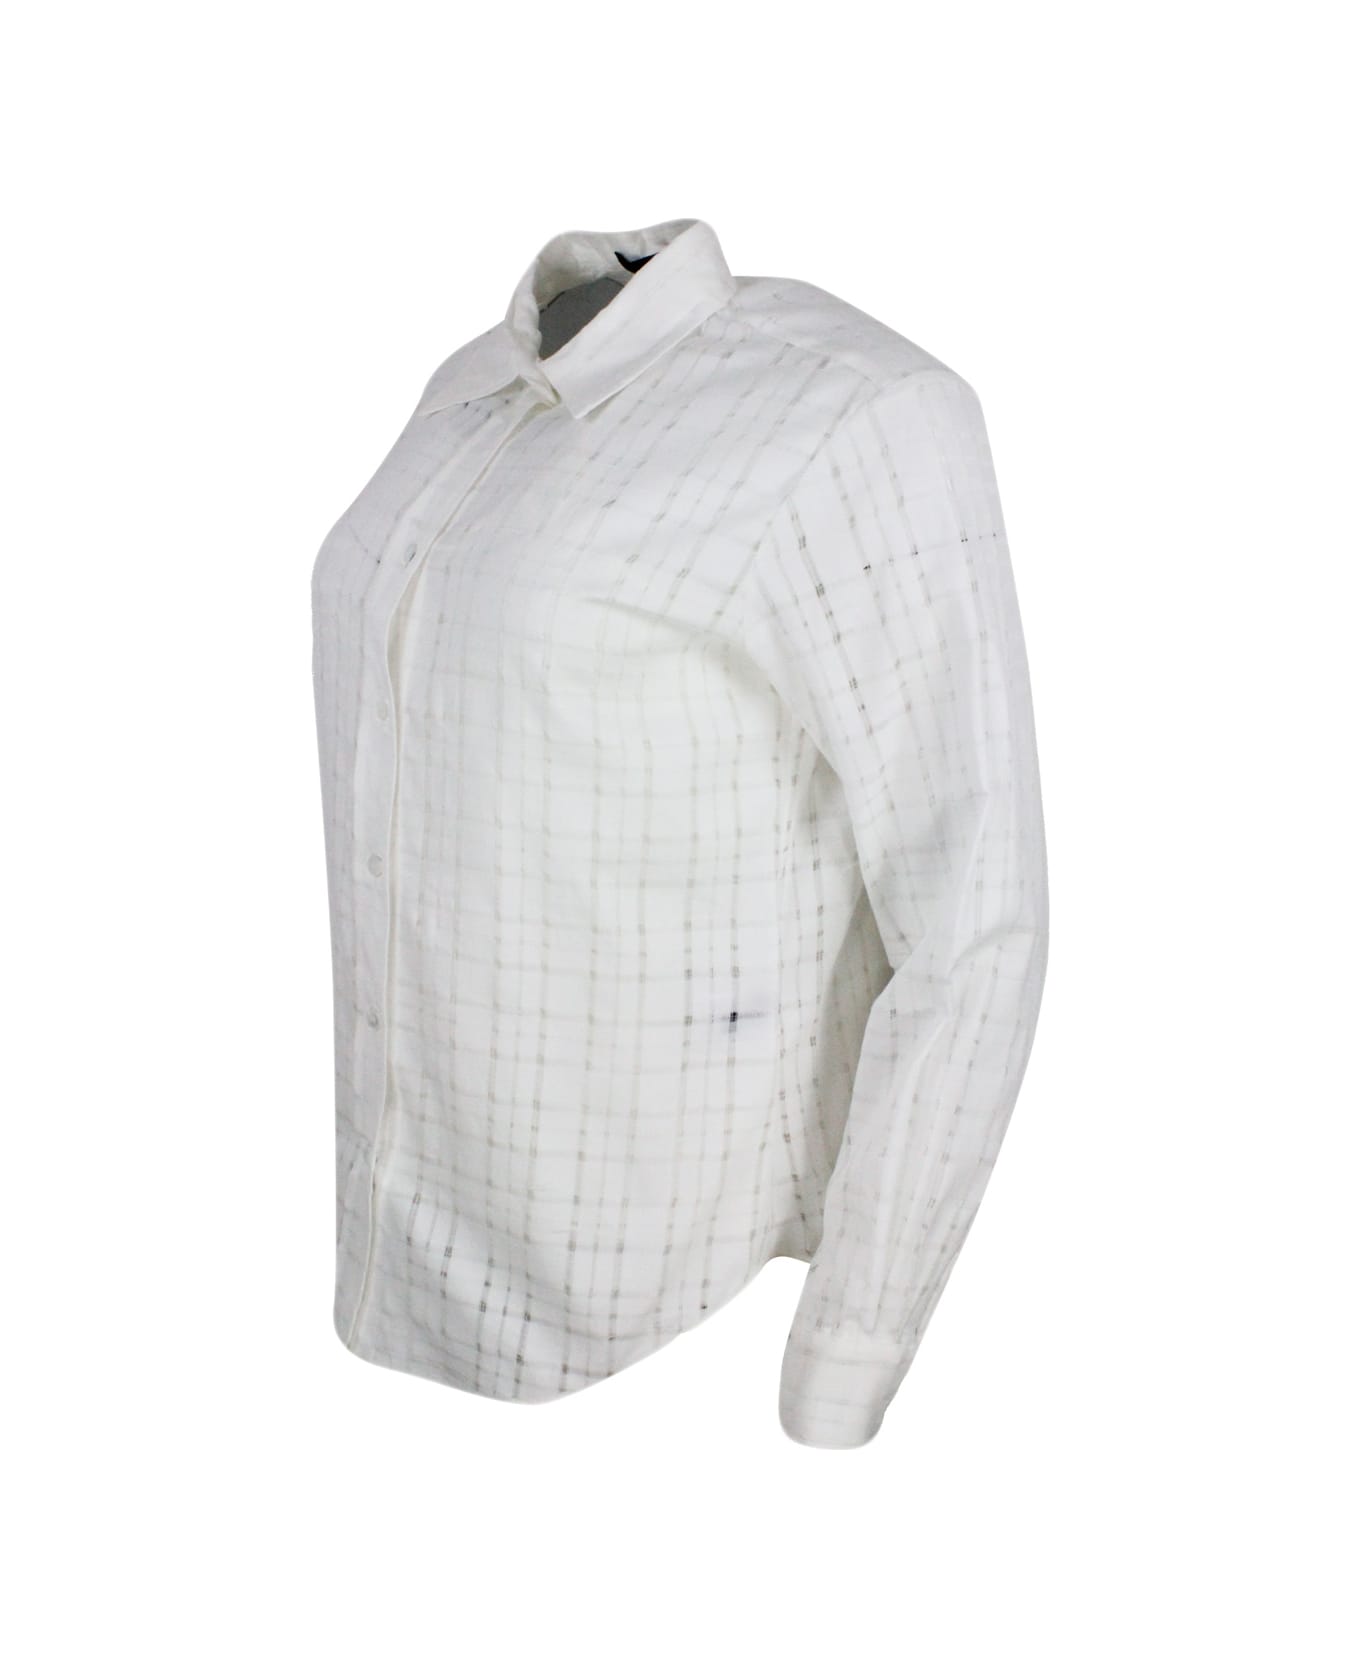 Lorena Antoniazzi Long-sleeved Shirt In Stretch Cotton With Perforated Window Work And Including Coordinated Top - cream シャツ